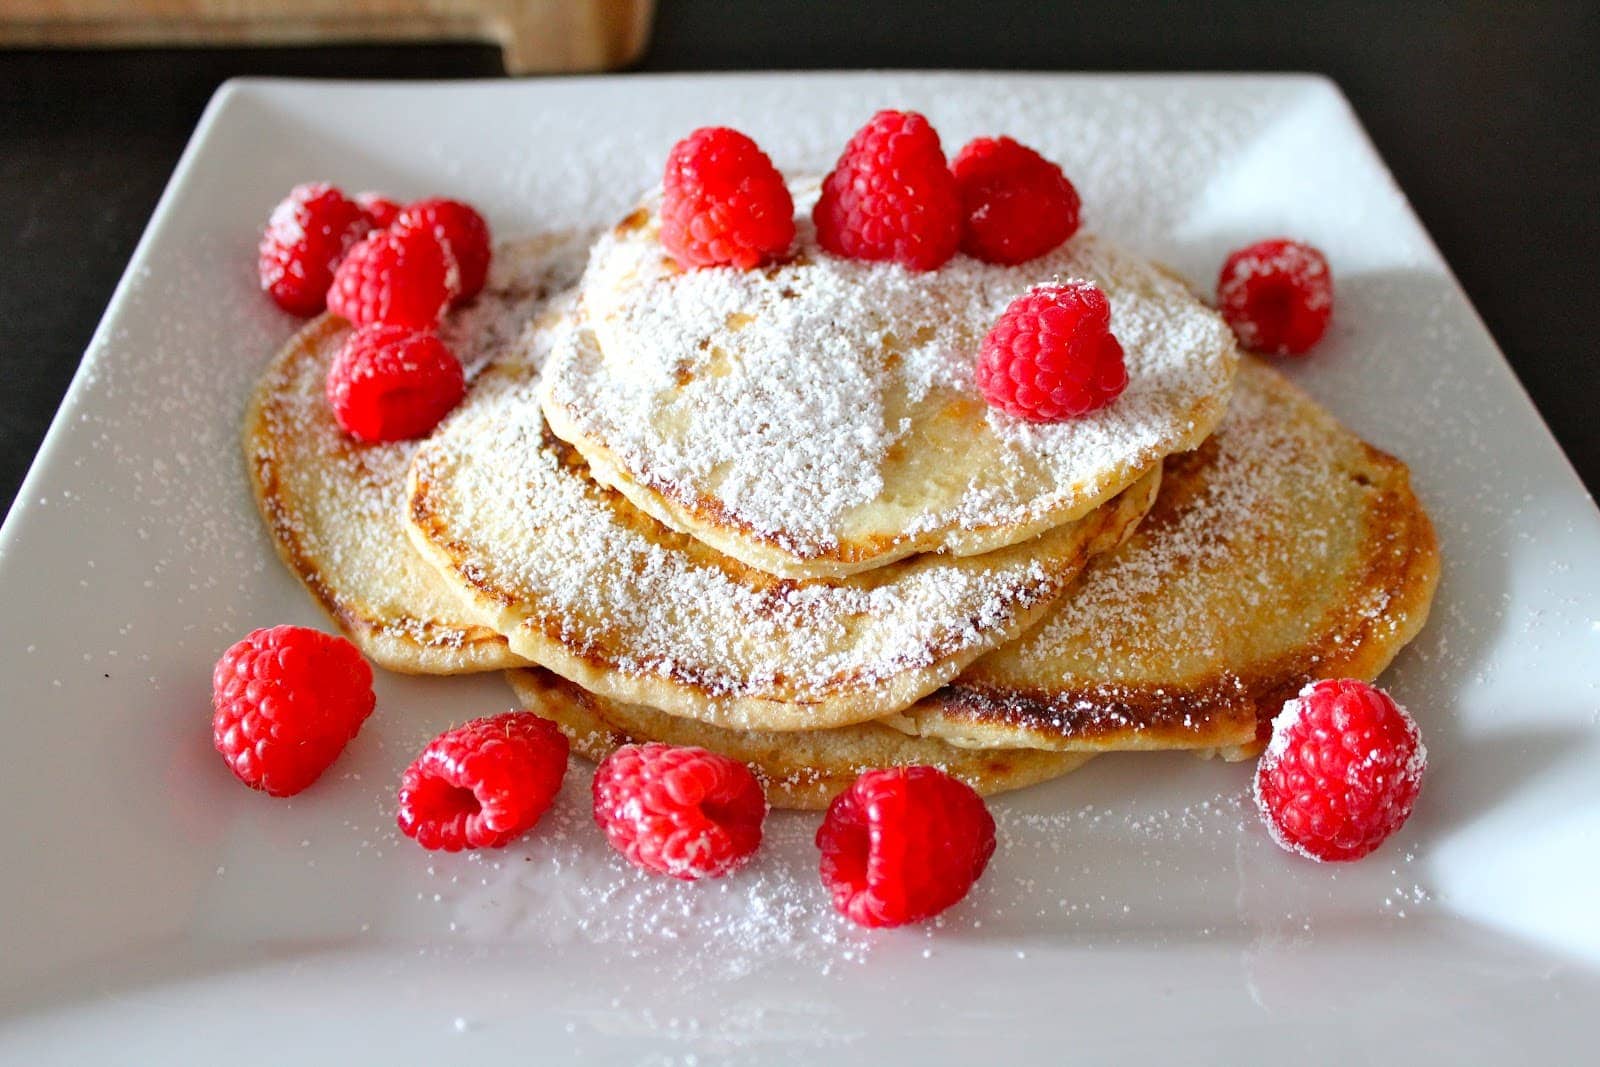 Top view of lemon ricotta pancakes on a white plate.